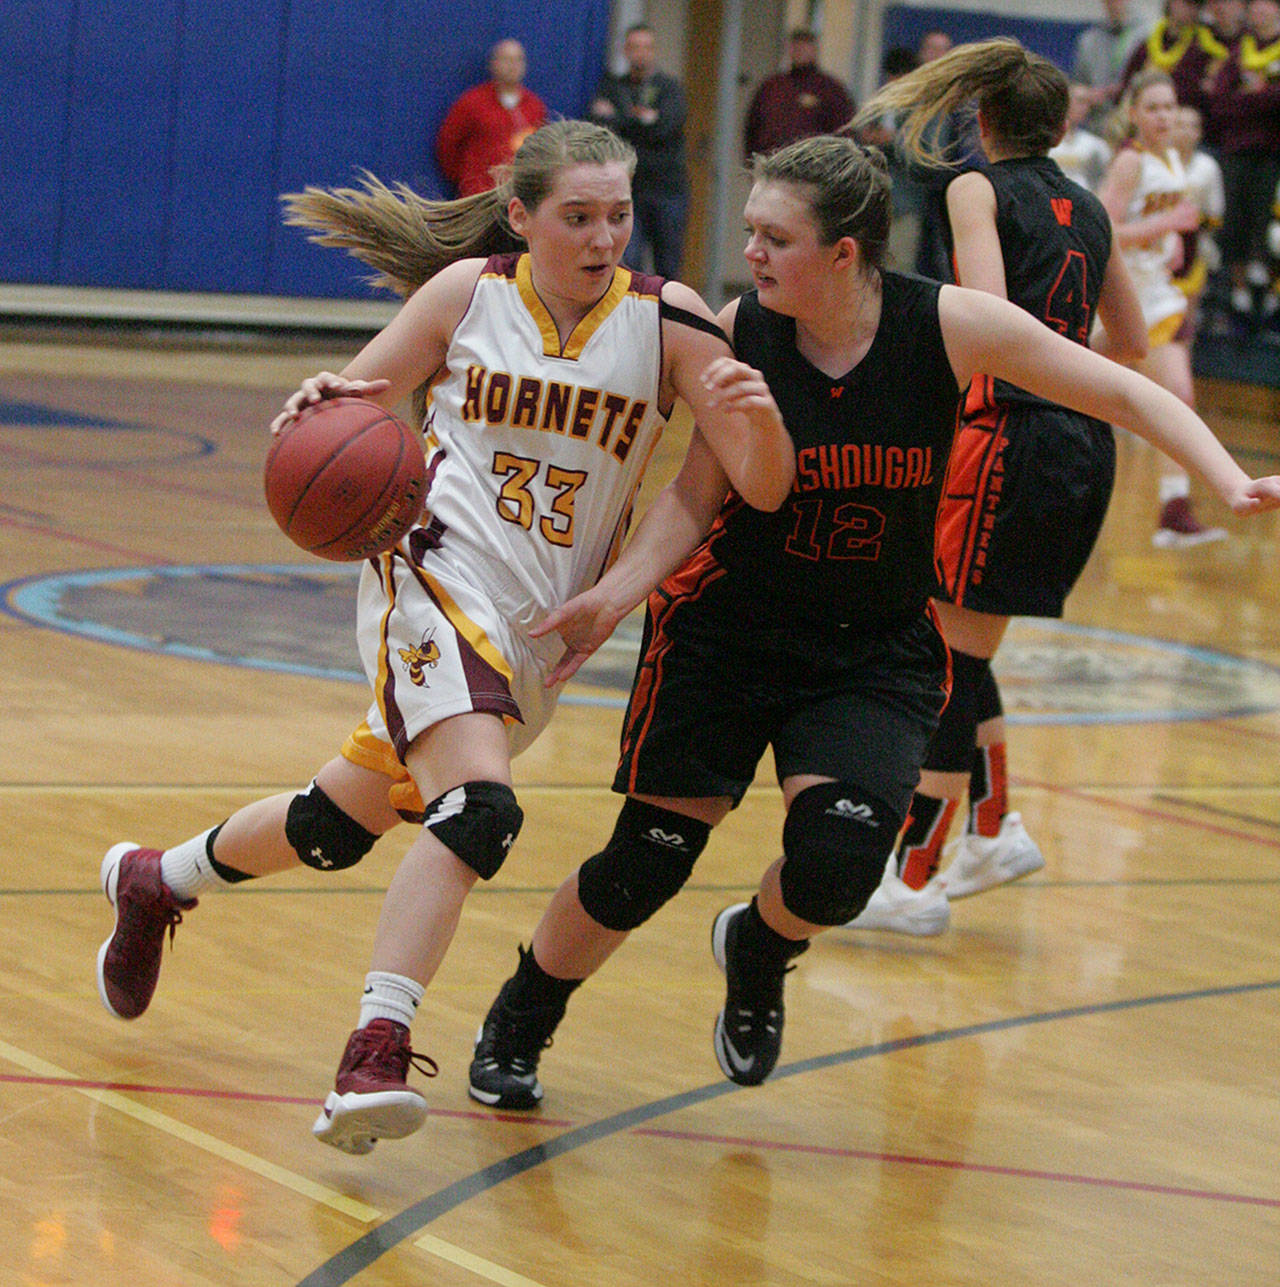 Sofia Lavinder looks to drive to the basket during Saturday’s regional victory over Washougal High. The junior guard sparked the Hornet offense with 22 points. Photo by Dennis Box.